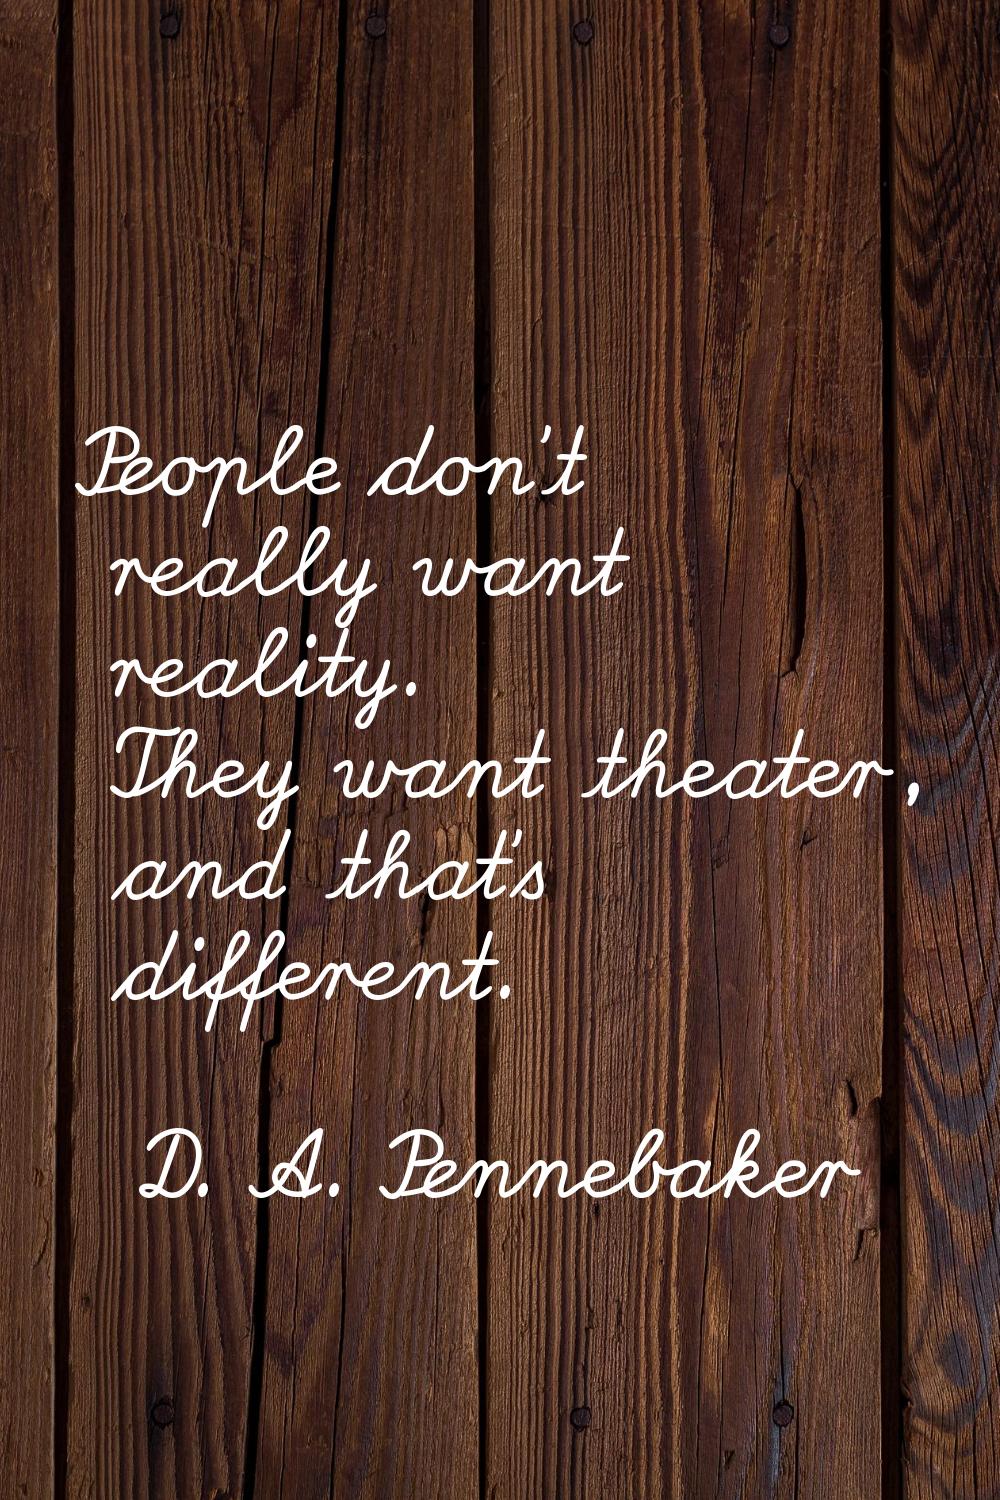 People don't really want reality. They want theater, and that's different.